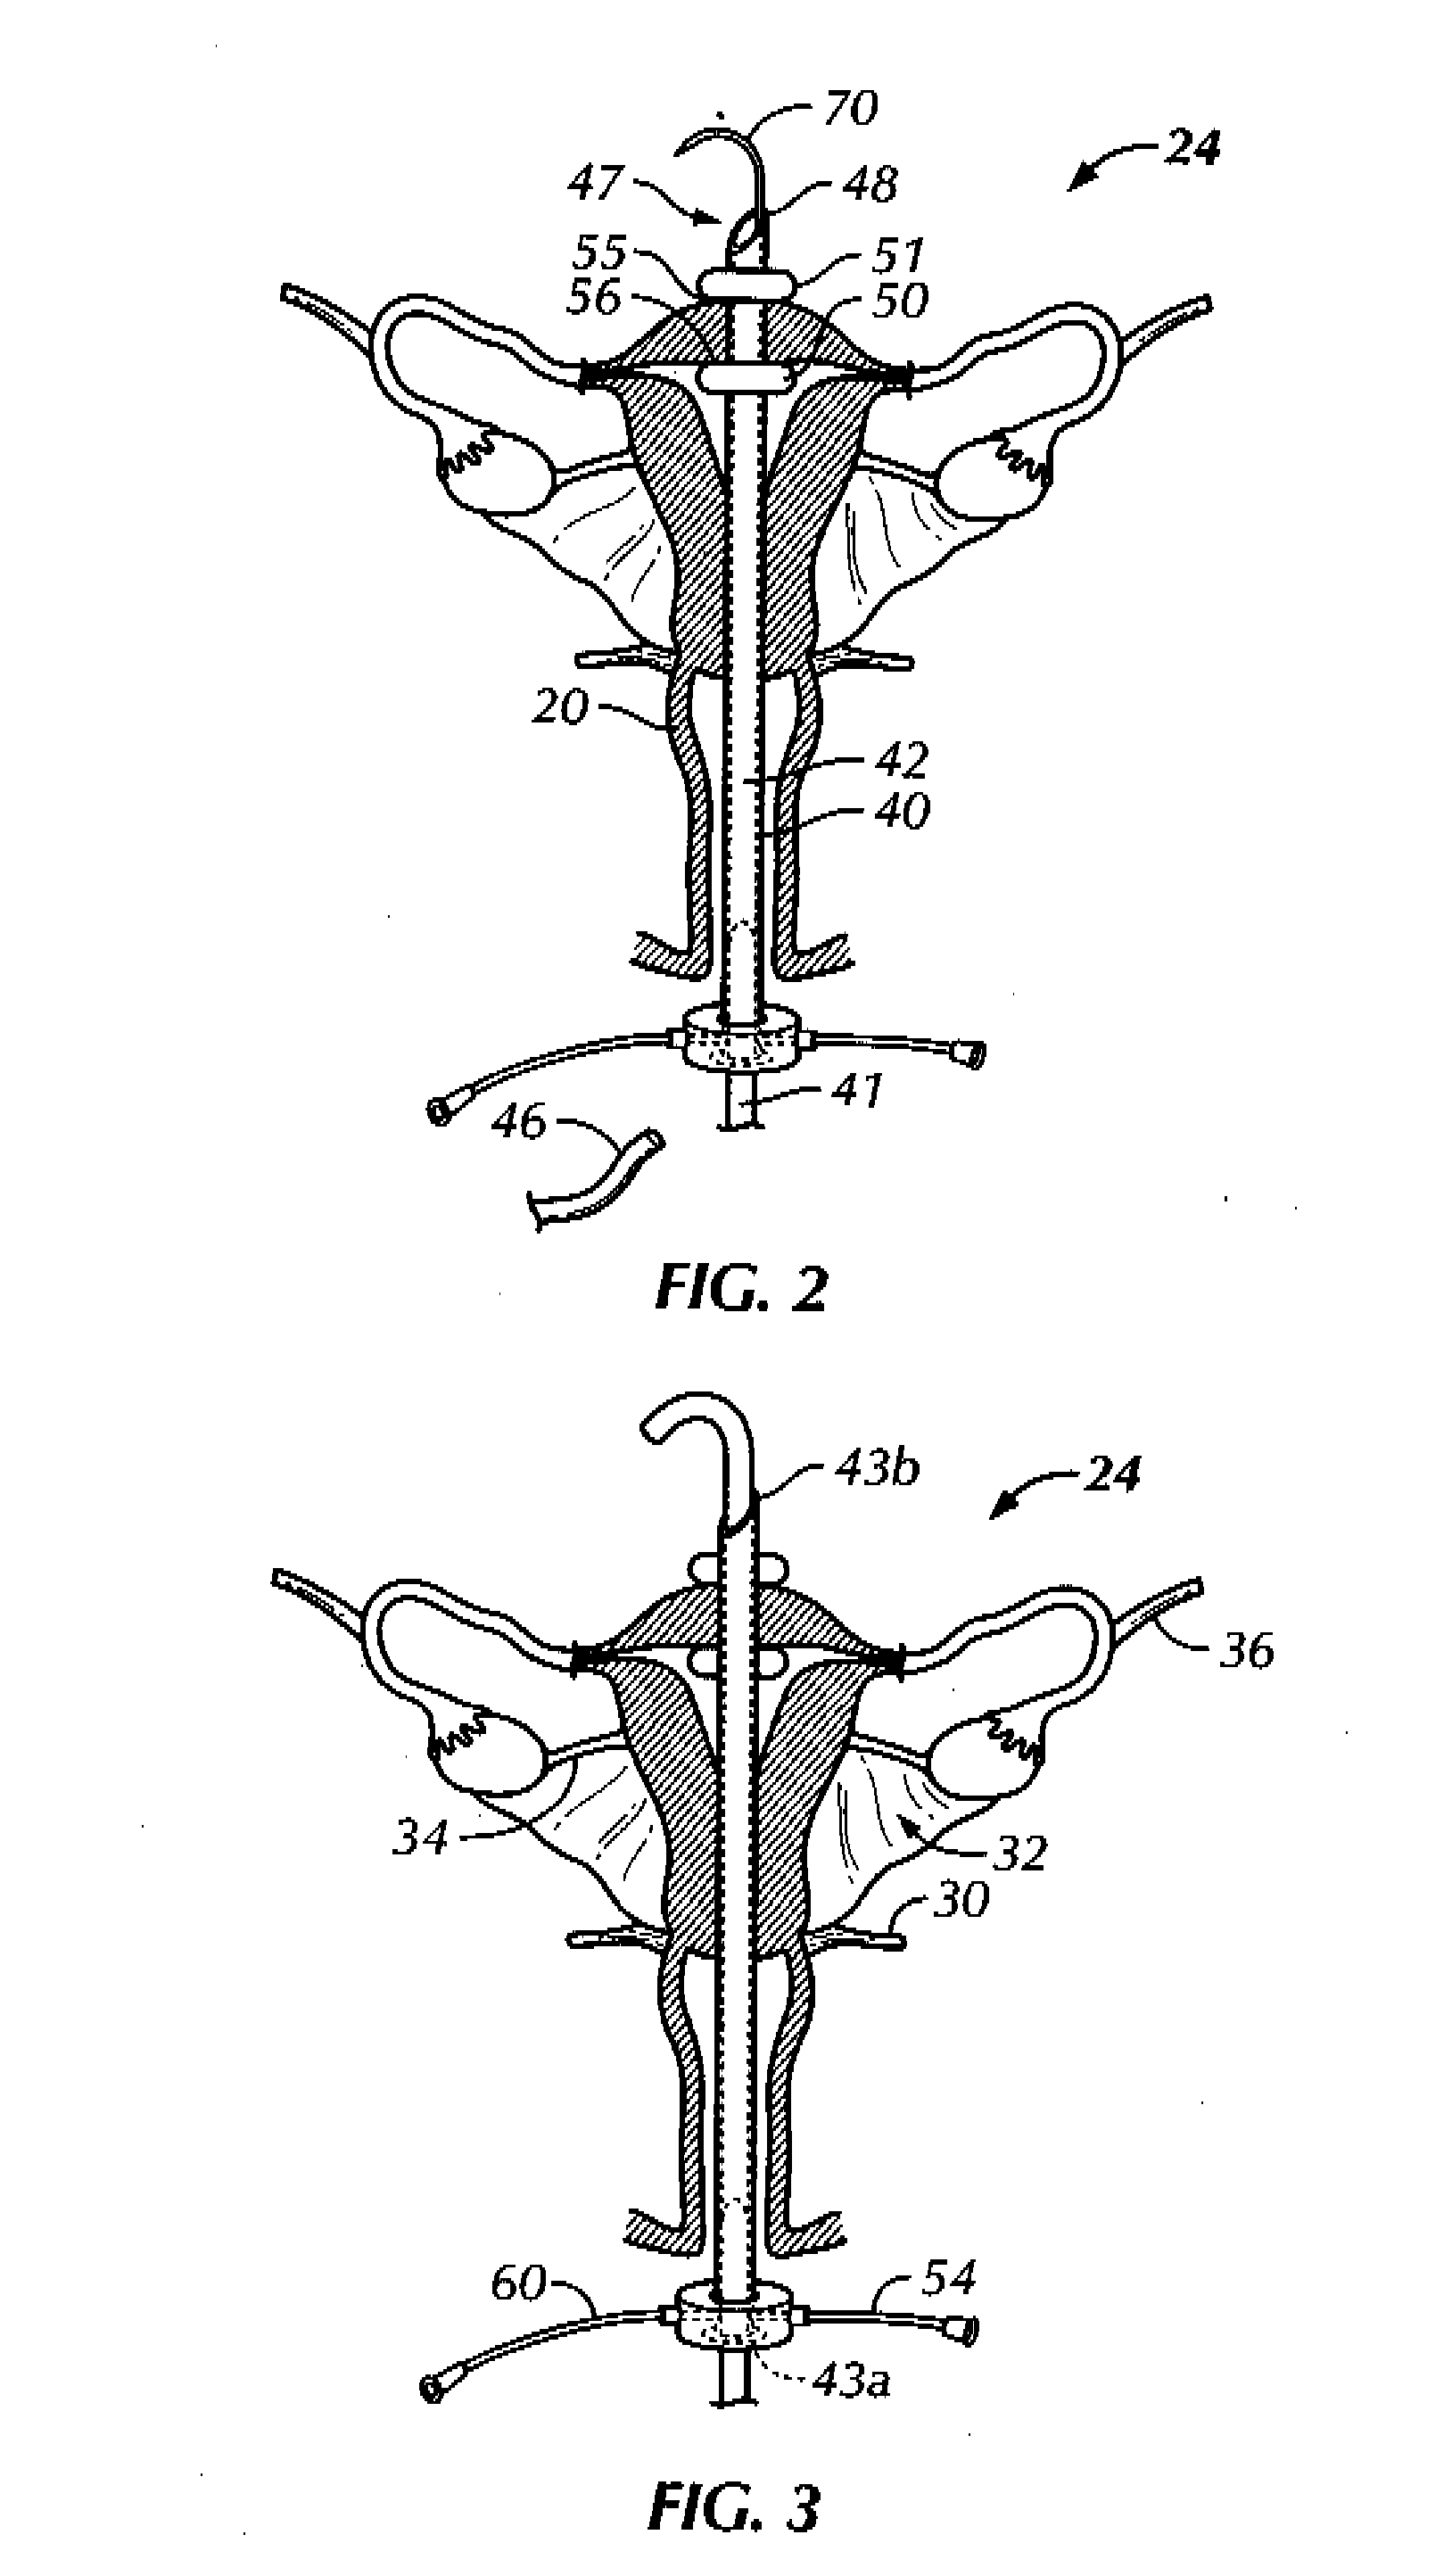 Methods and Apparatus for Natural Orifice Vaginal Hysterectomy